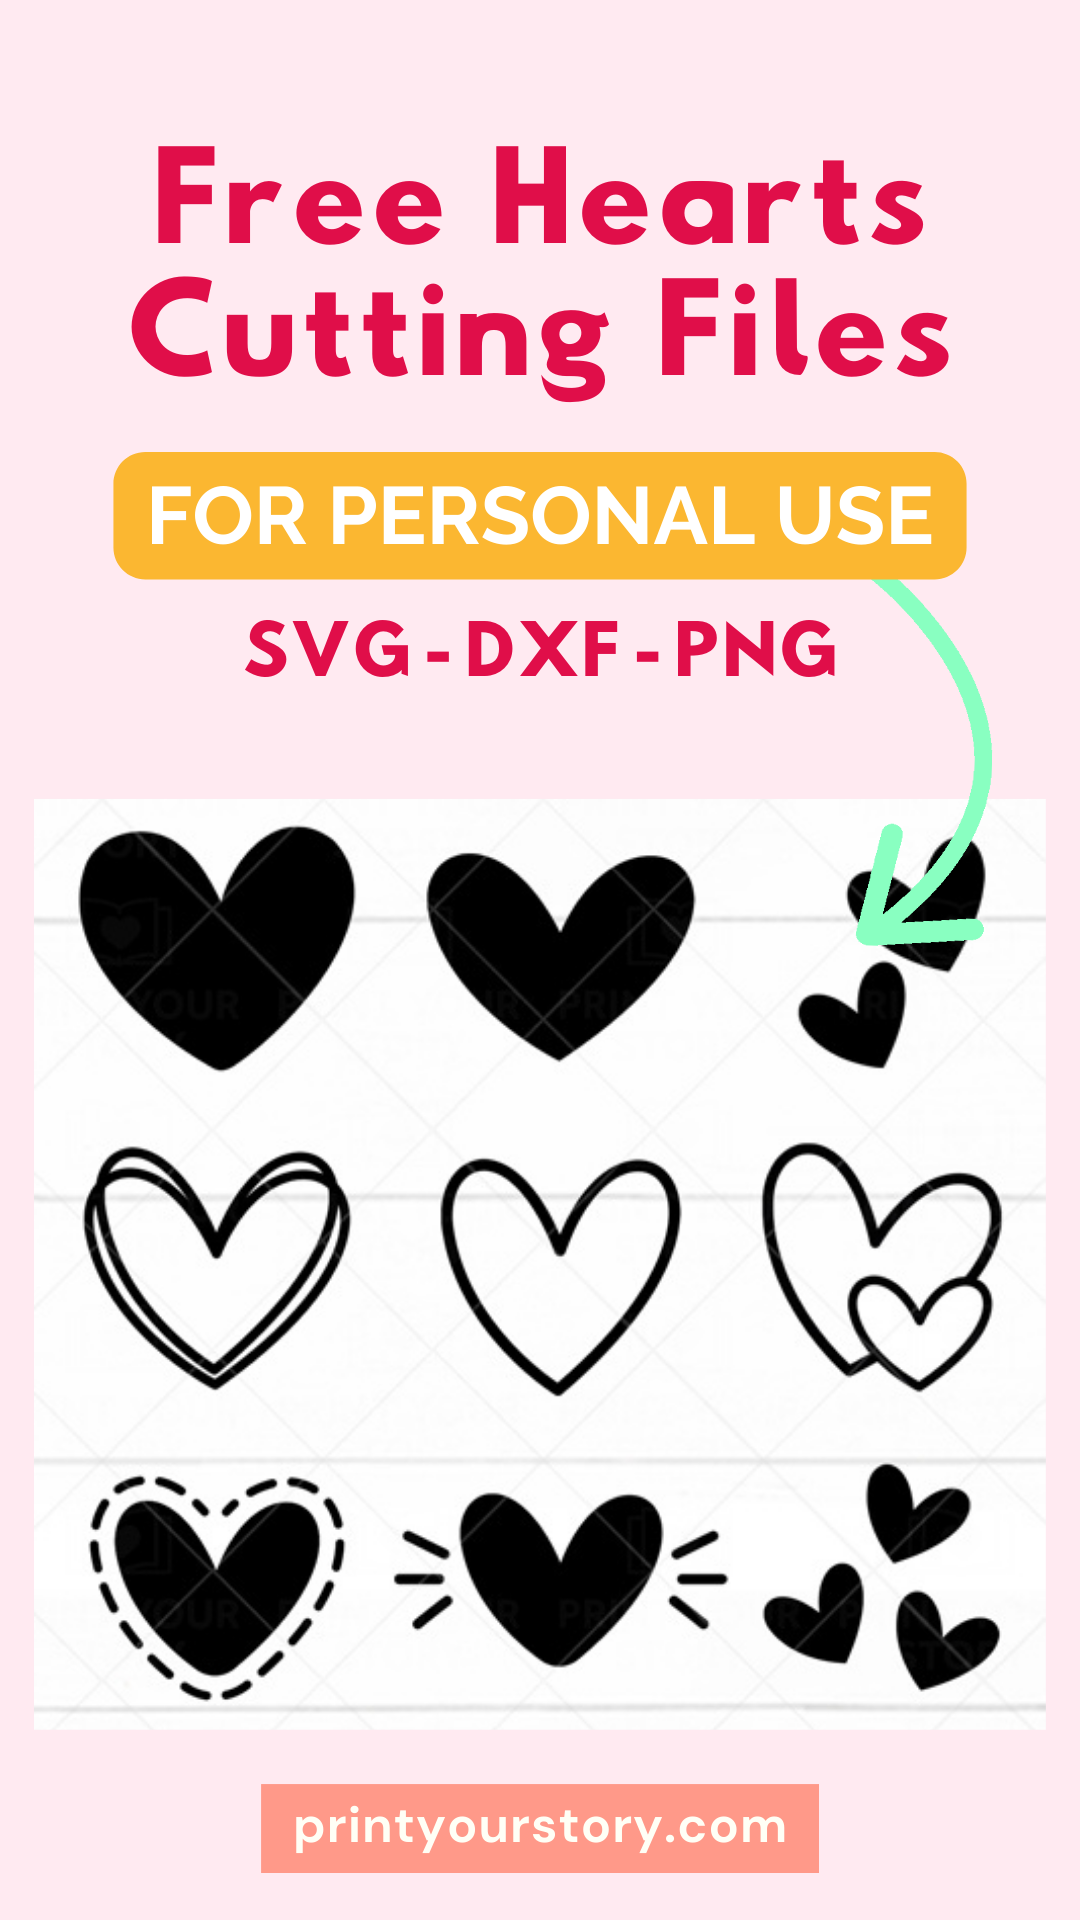 9 FREE Heart SVG files - Free Download